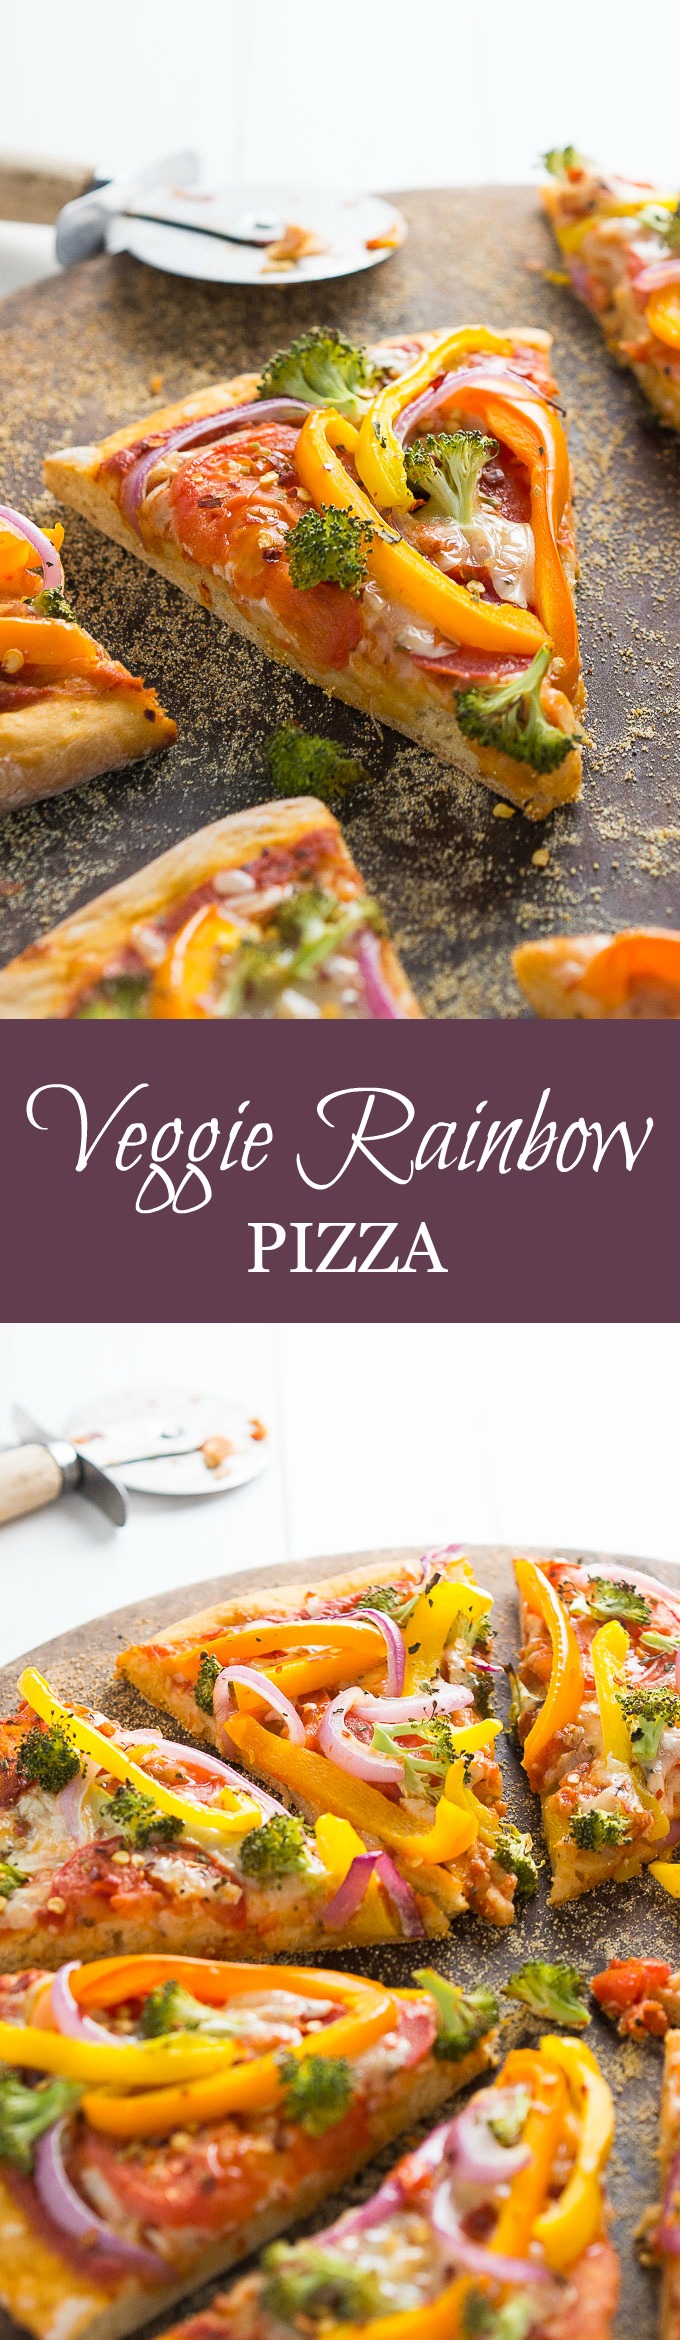 Veggie Rainbow Pizza- a healthy festive meal for St. Patrick's Day or Meatless Monday!